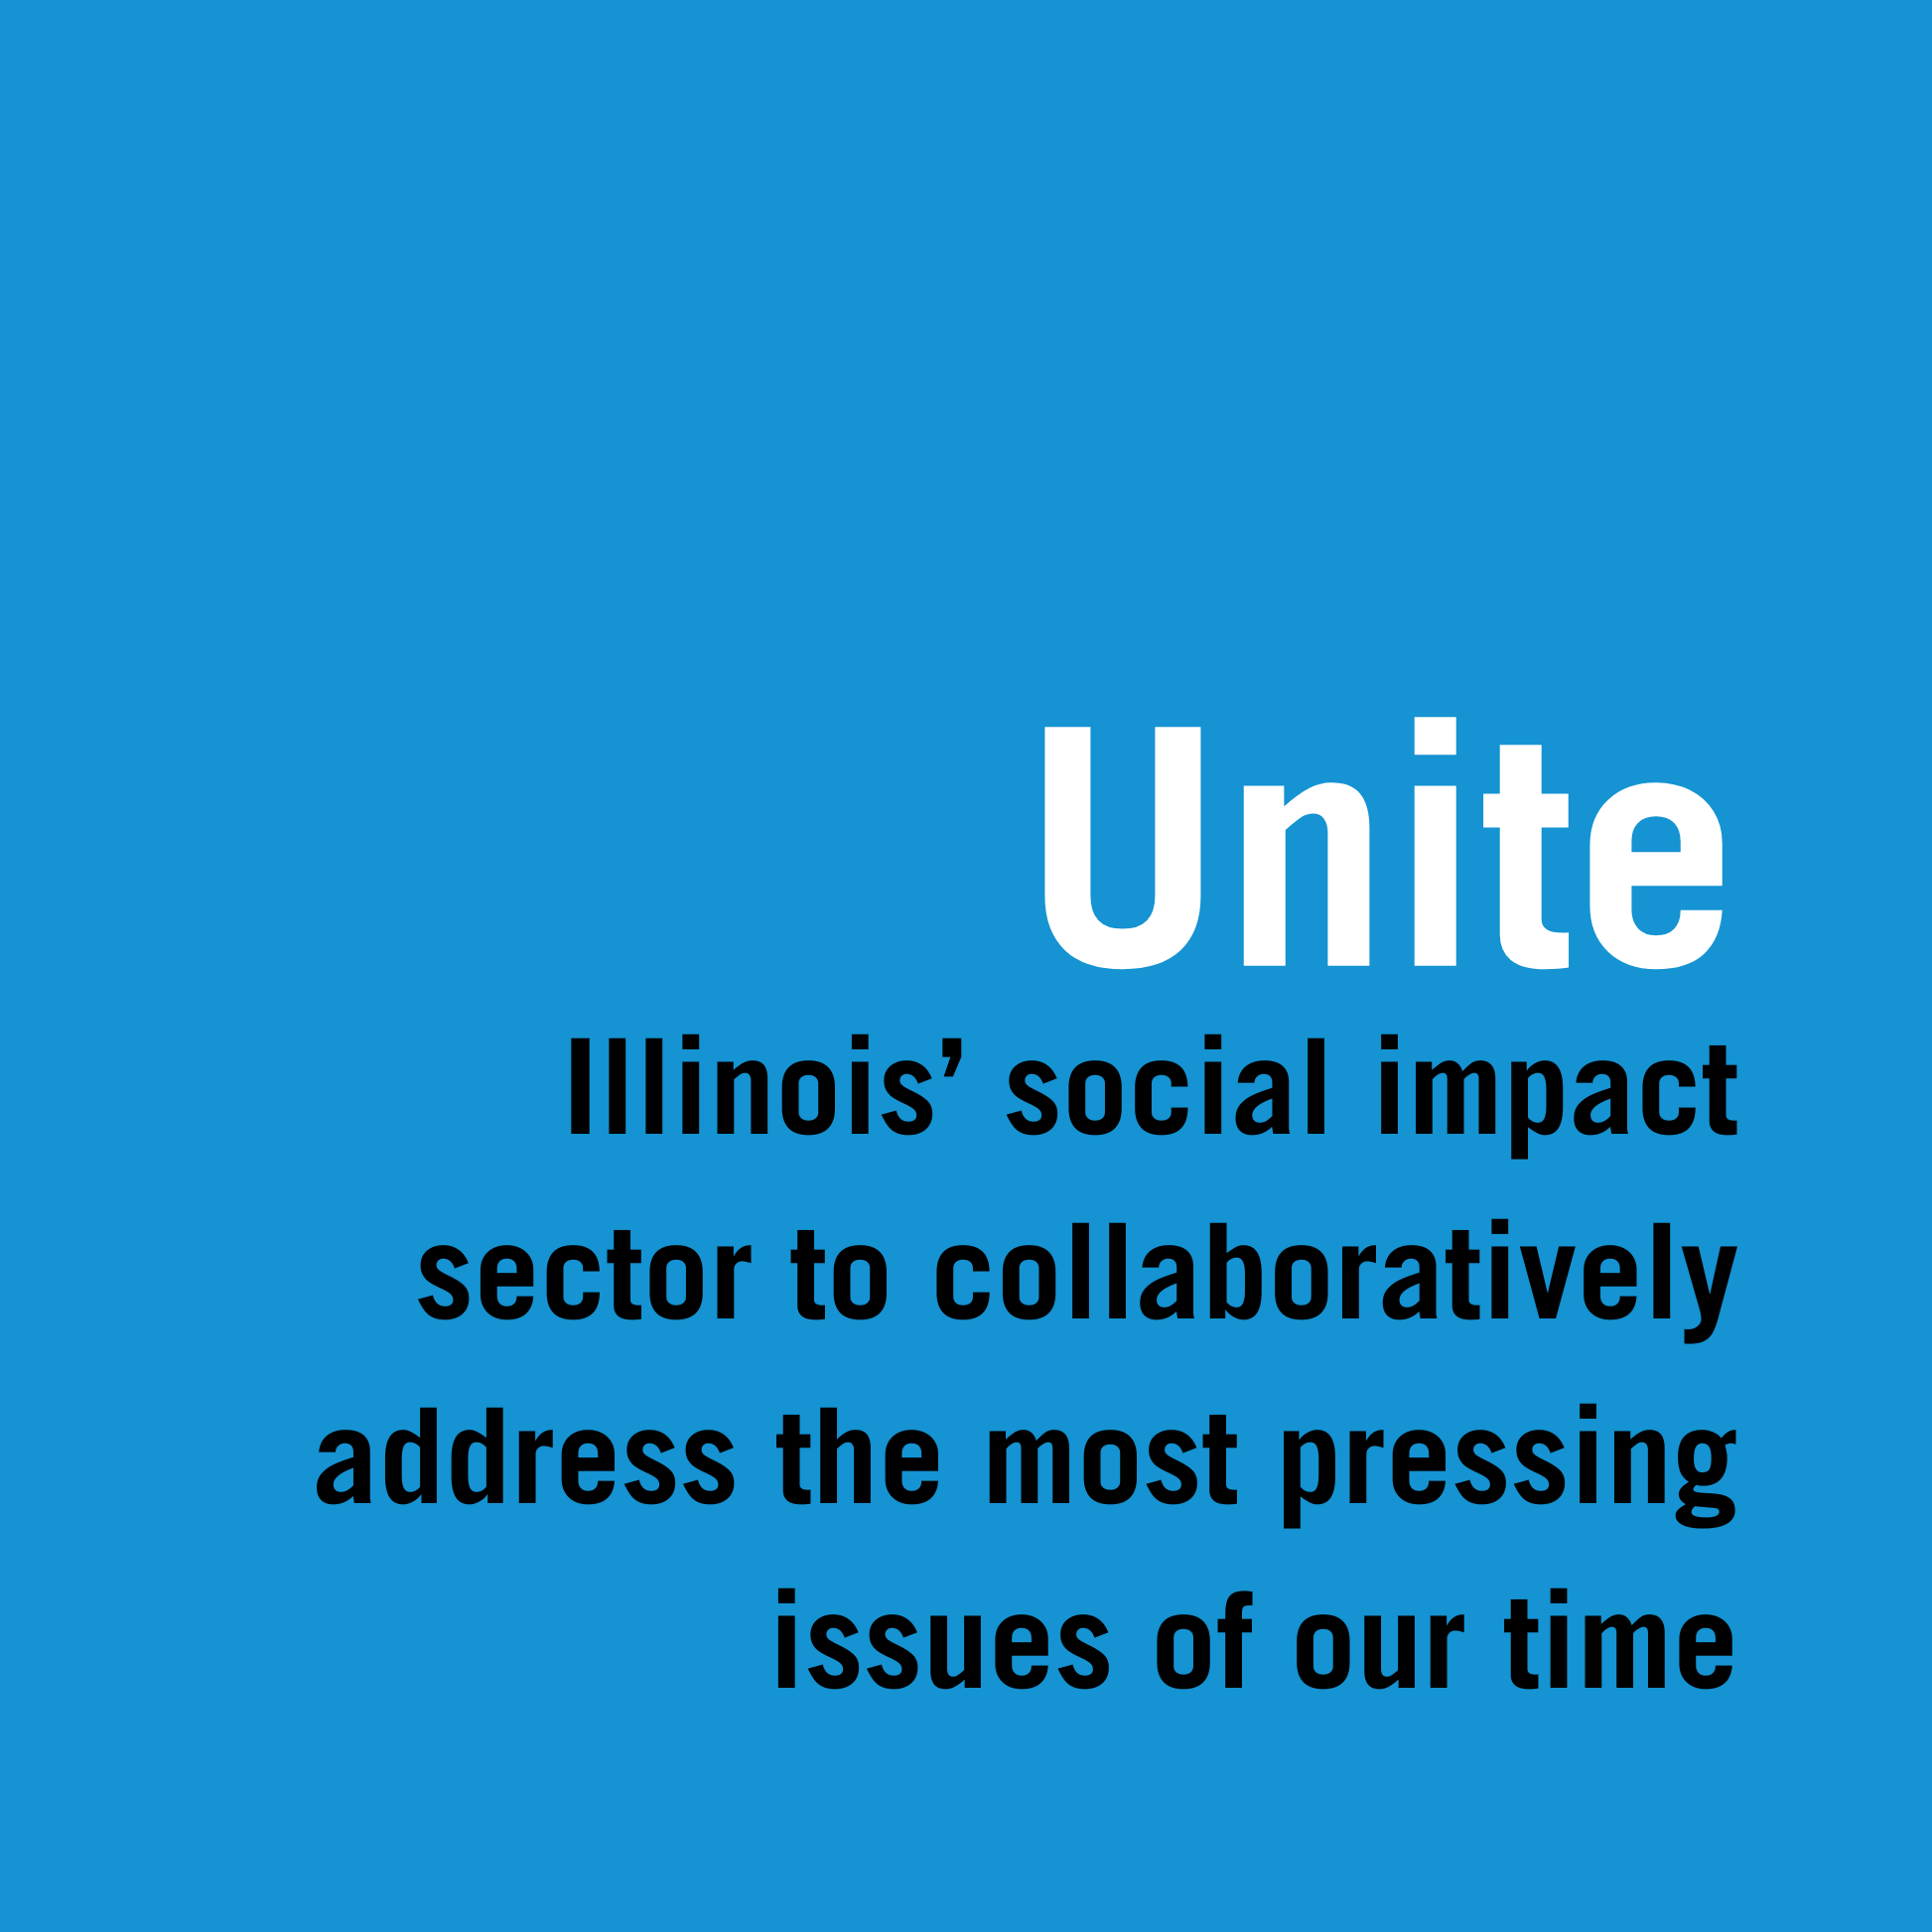 uniting Illinois’ social impact sector to collaboratively address the most pressing issues of our time